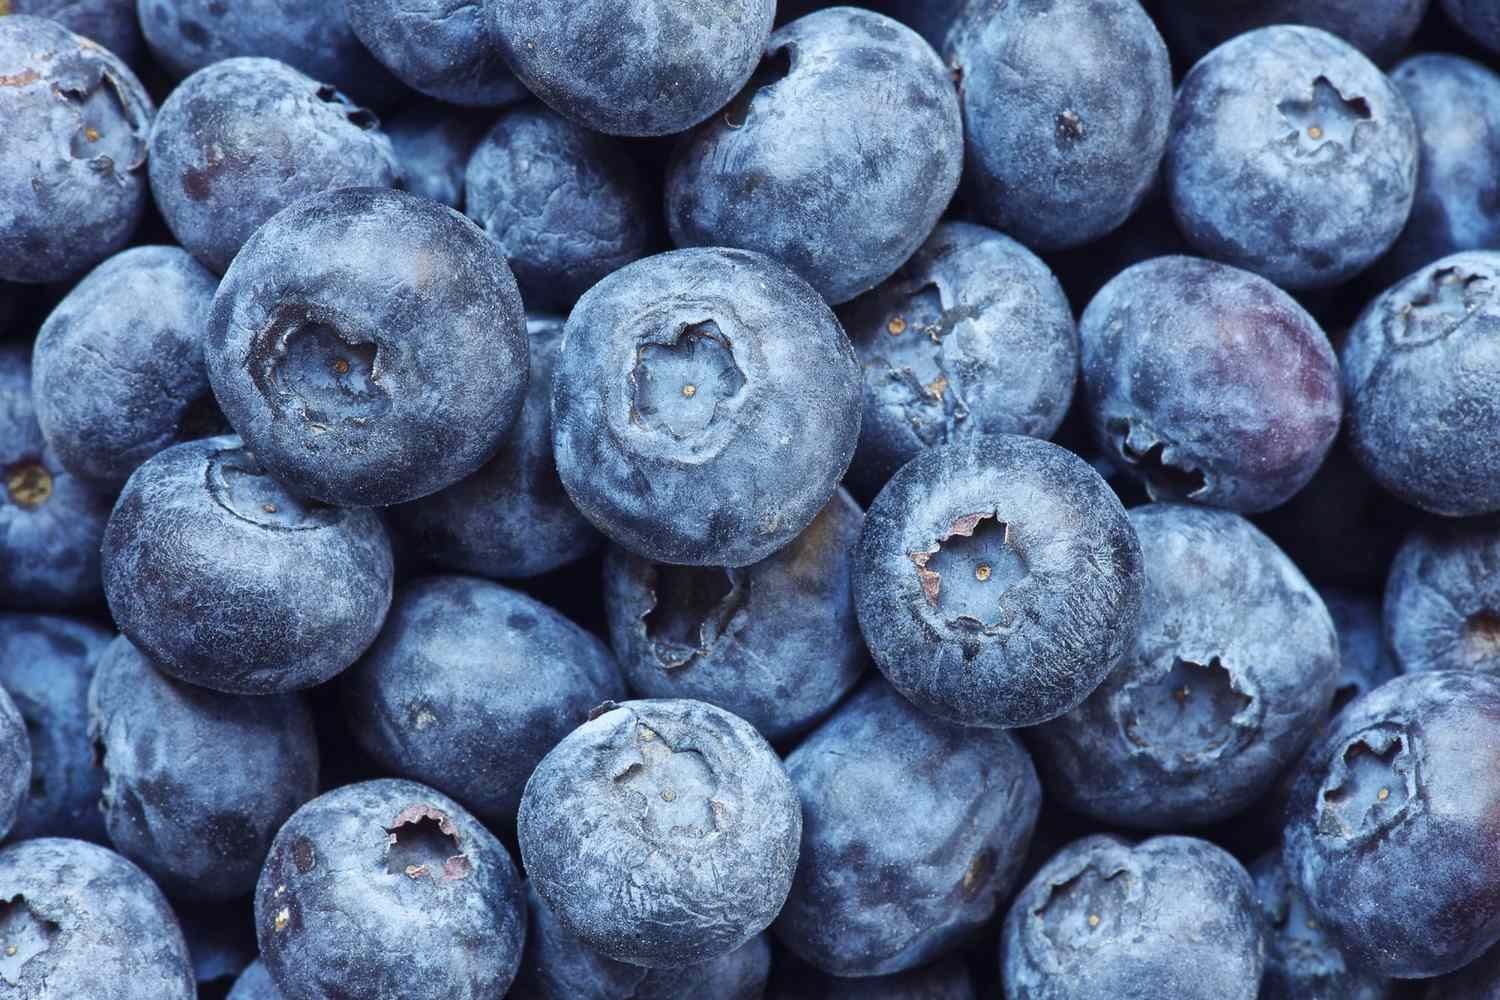 The Top 10 Superfoods, According to More Than 1,100 Registered Dietitians